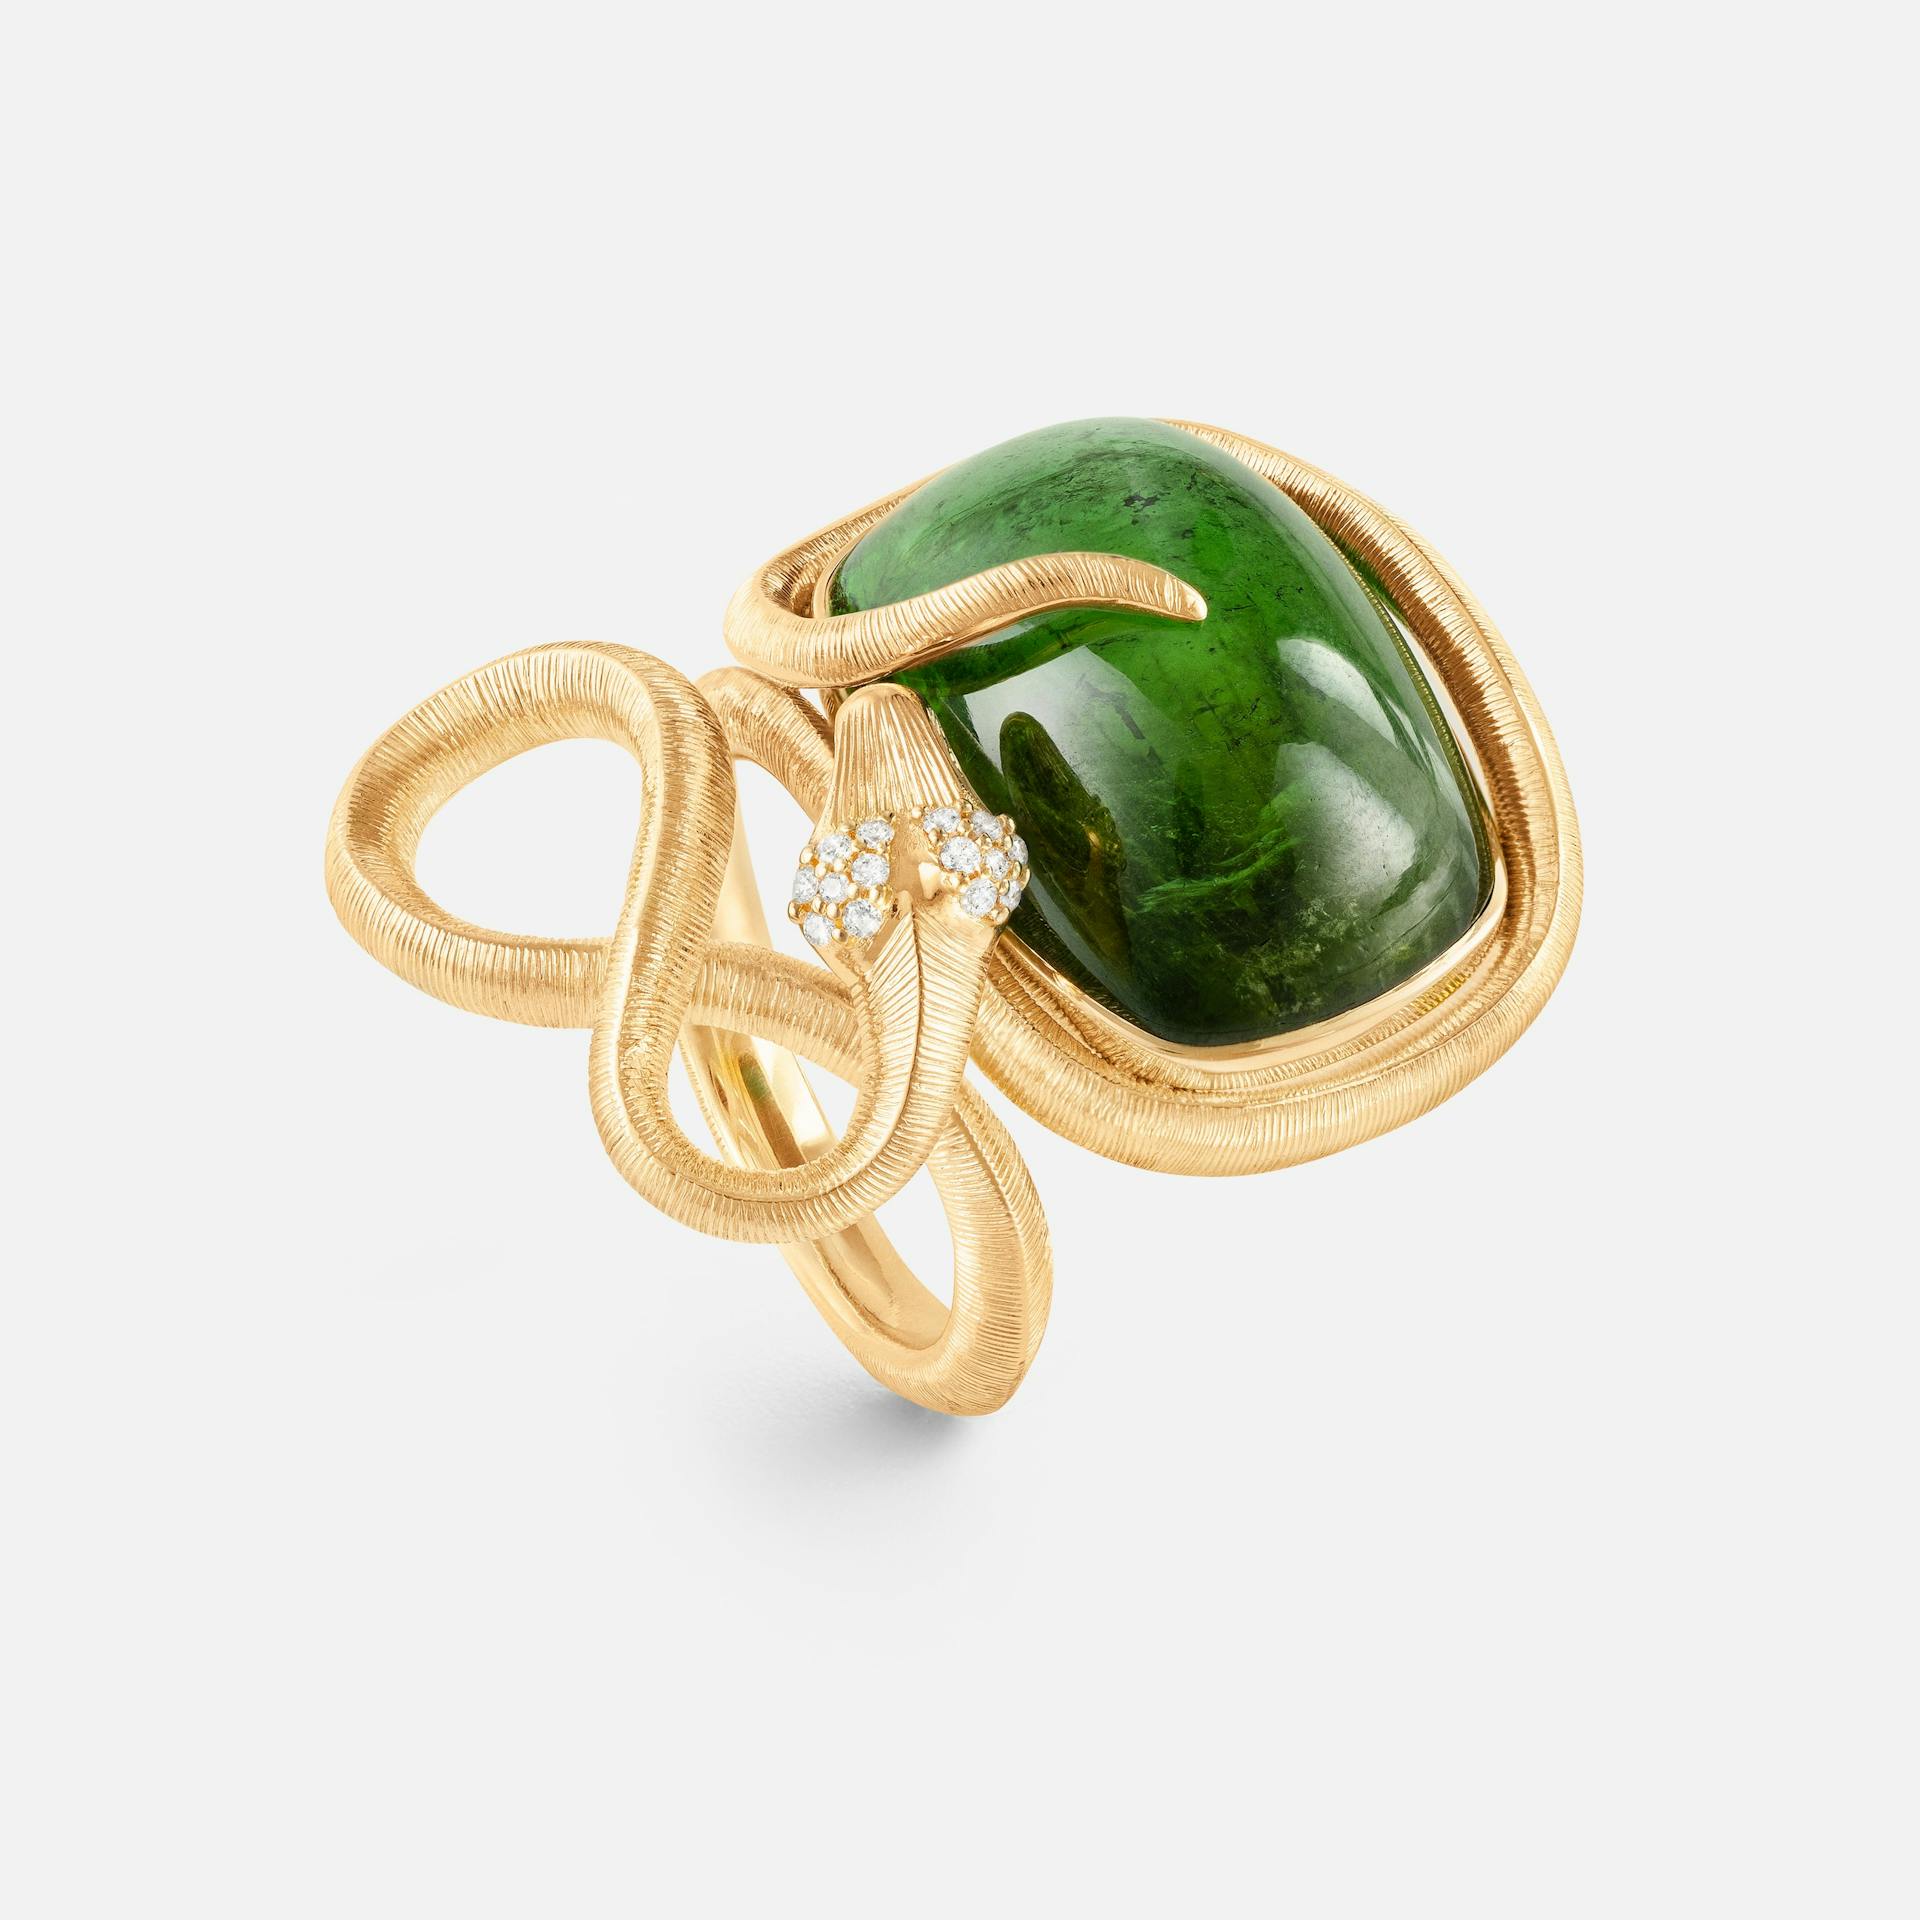 Snakes ring 18k gold with green tourmaline and diamonds 0.08 ct. TW